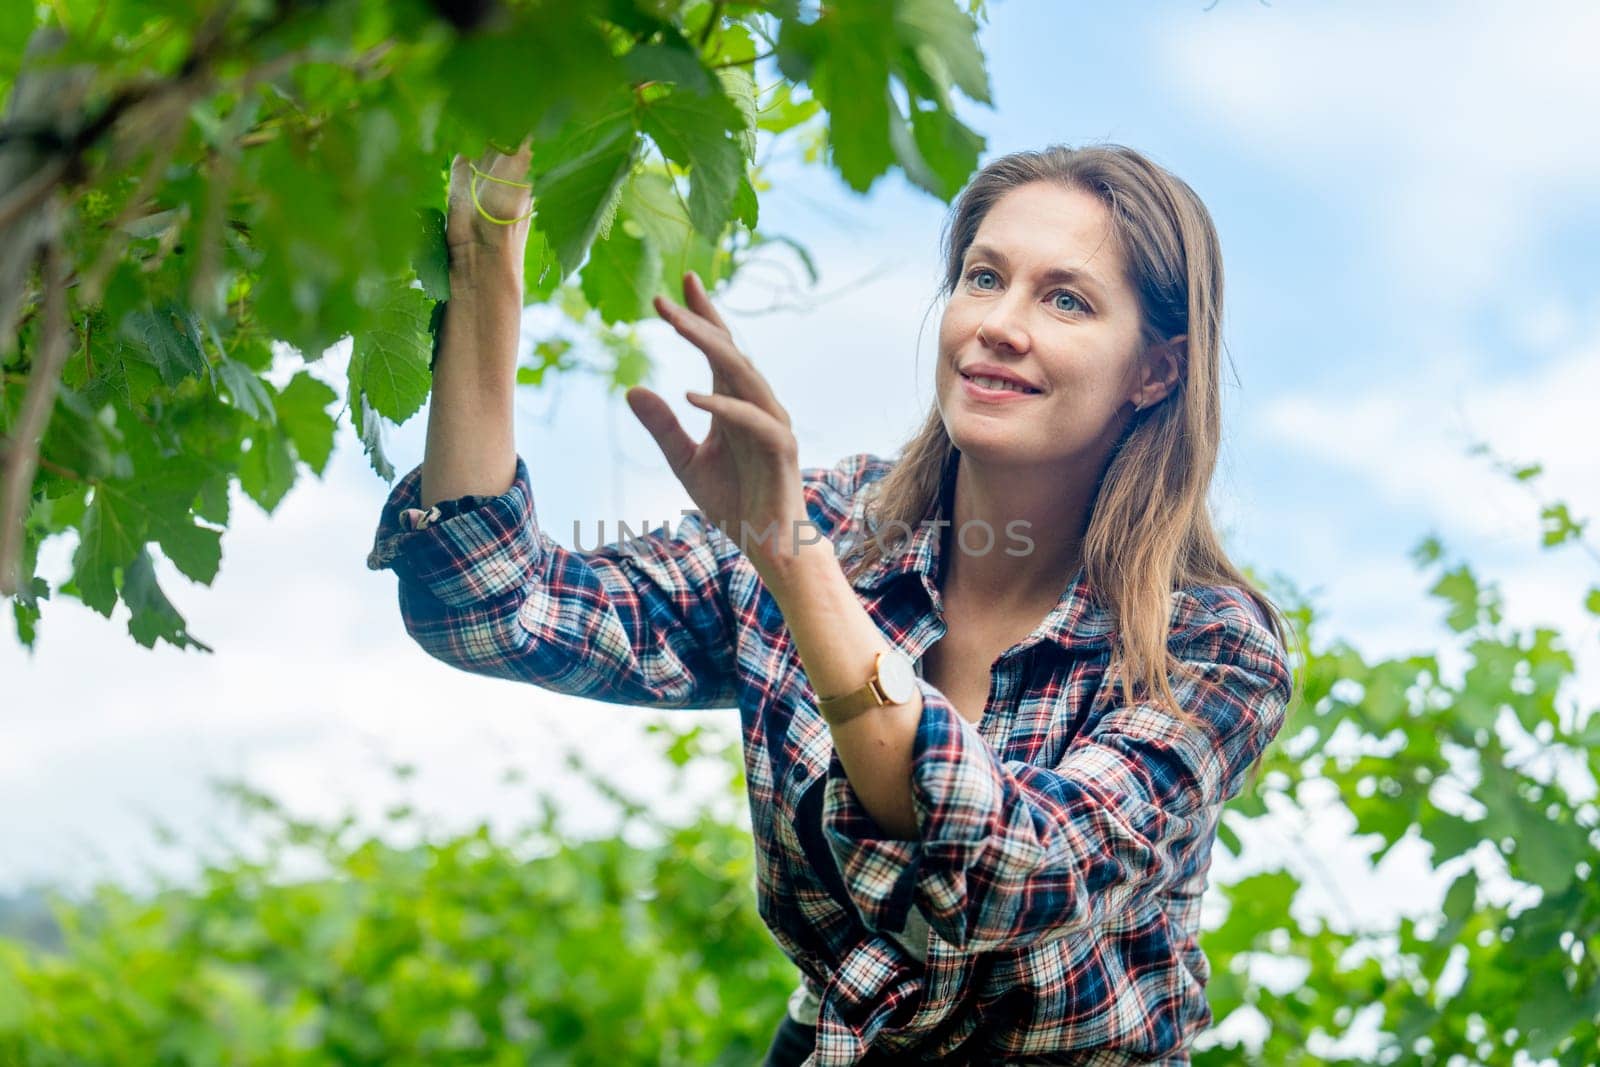 Lower view of winery worker or farmer woman stand to check grape vine in the yard or field with day light and she look happy during working.